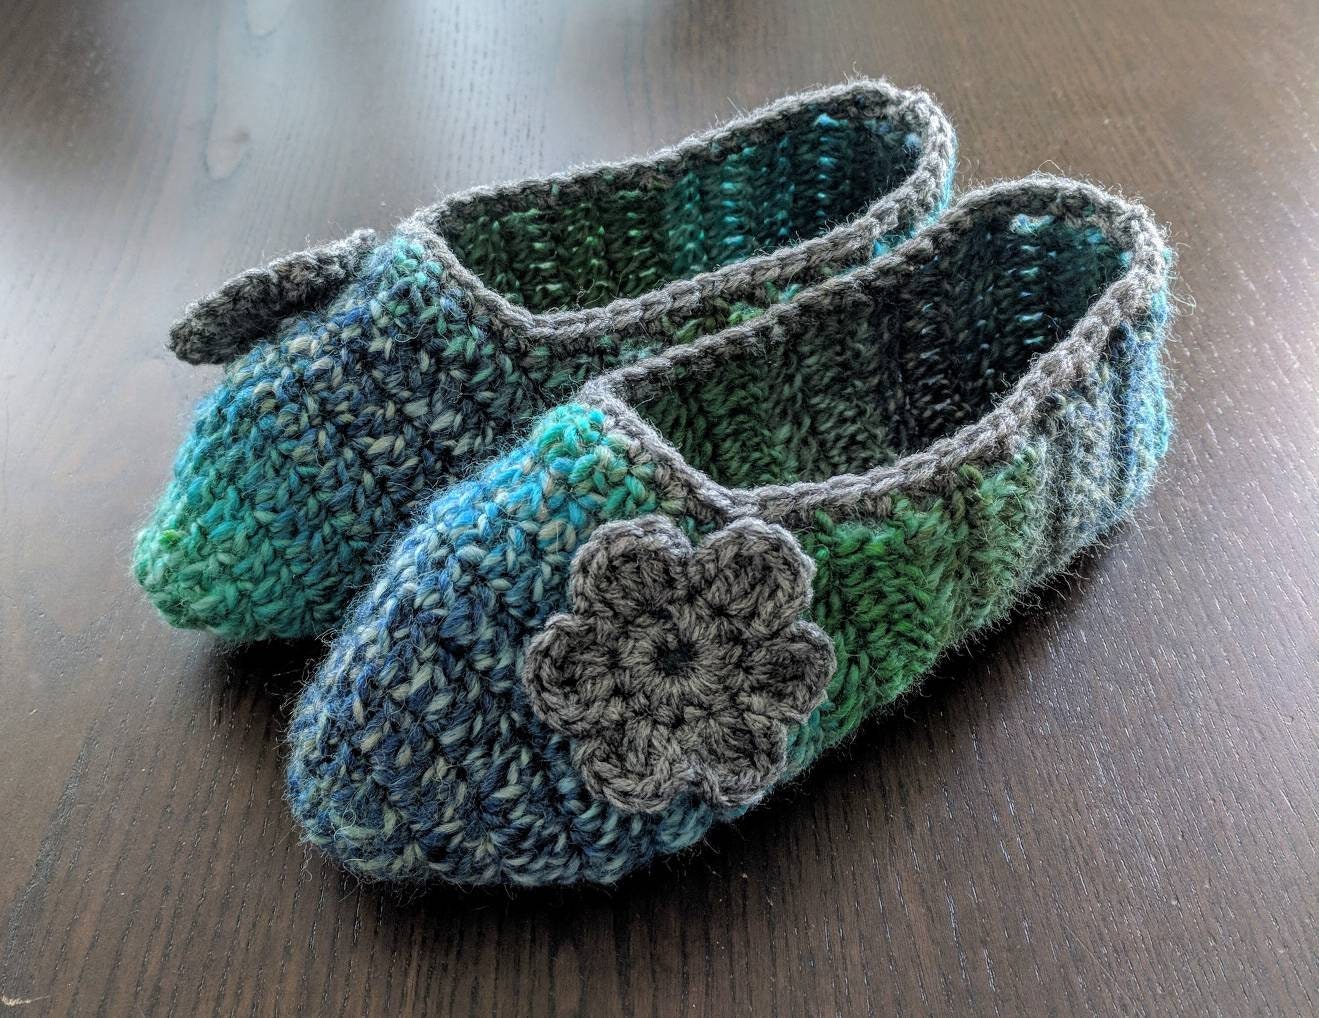 Cozy Crochet Slippers Green Blue and Gray - Etsy